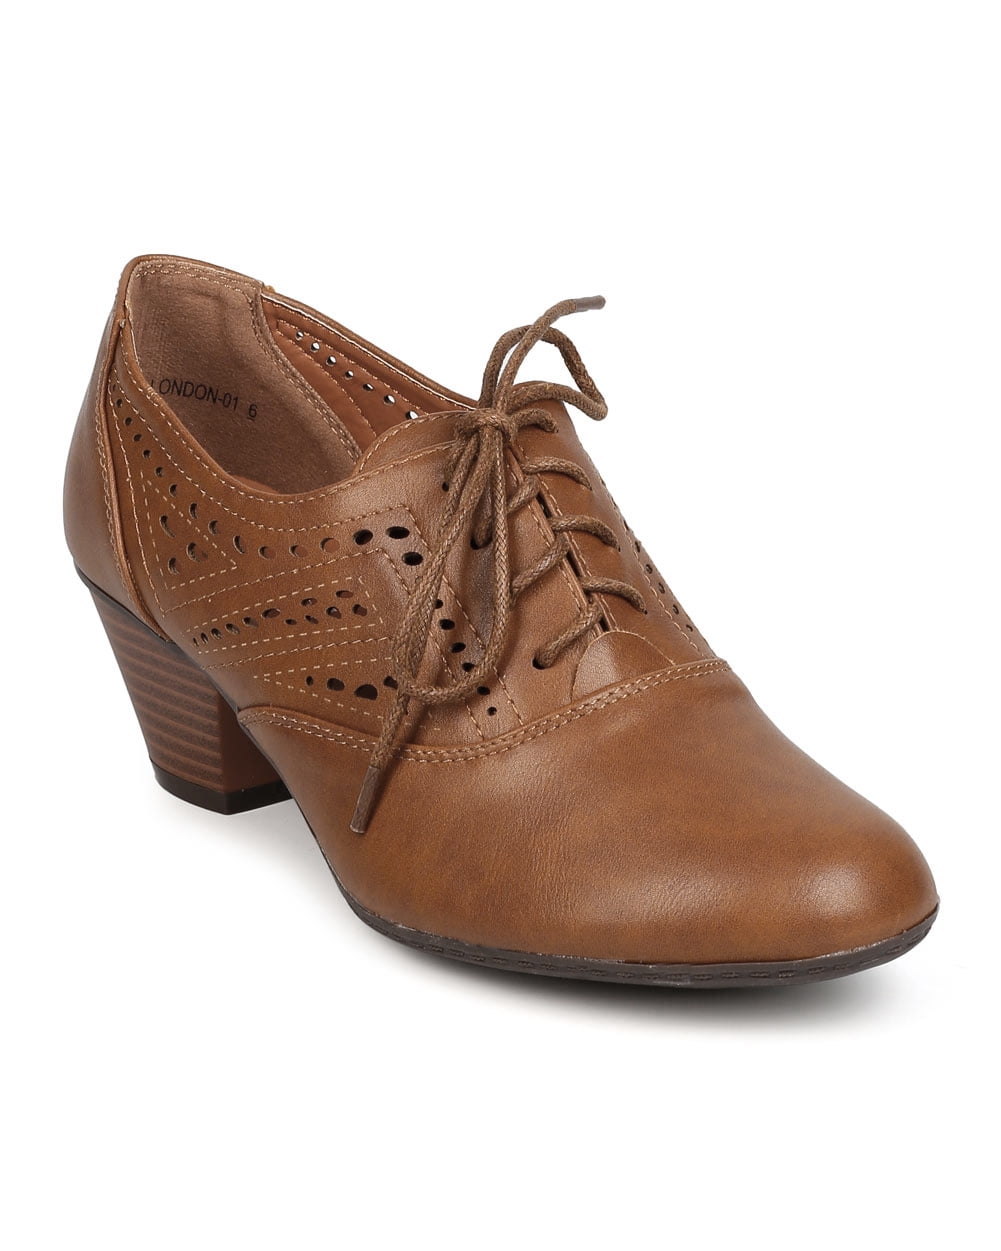 women's lace up perforated oxfords